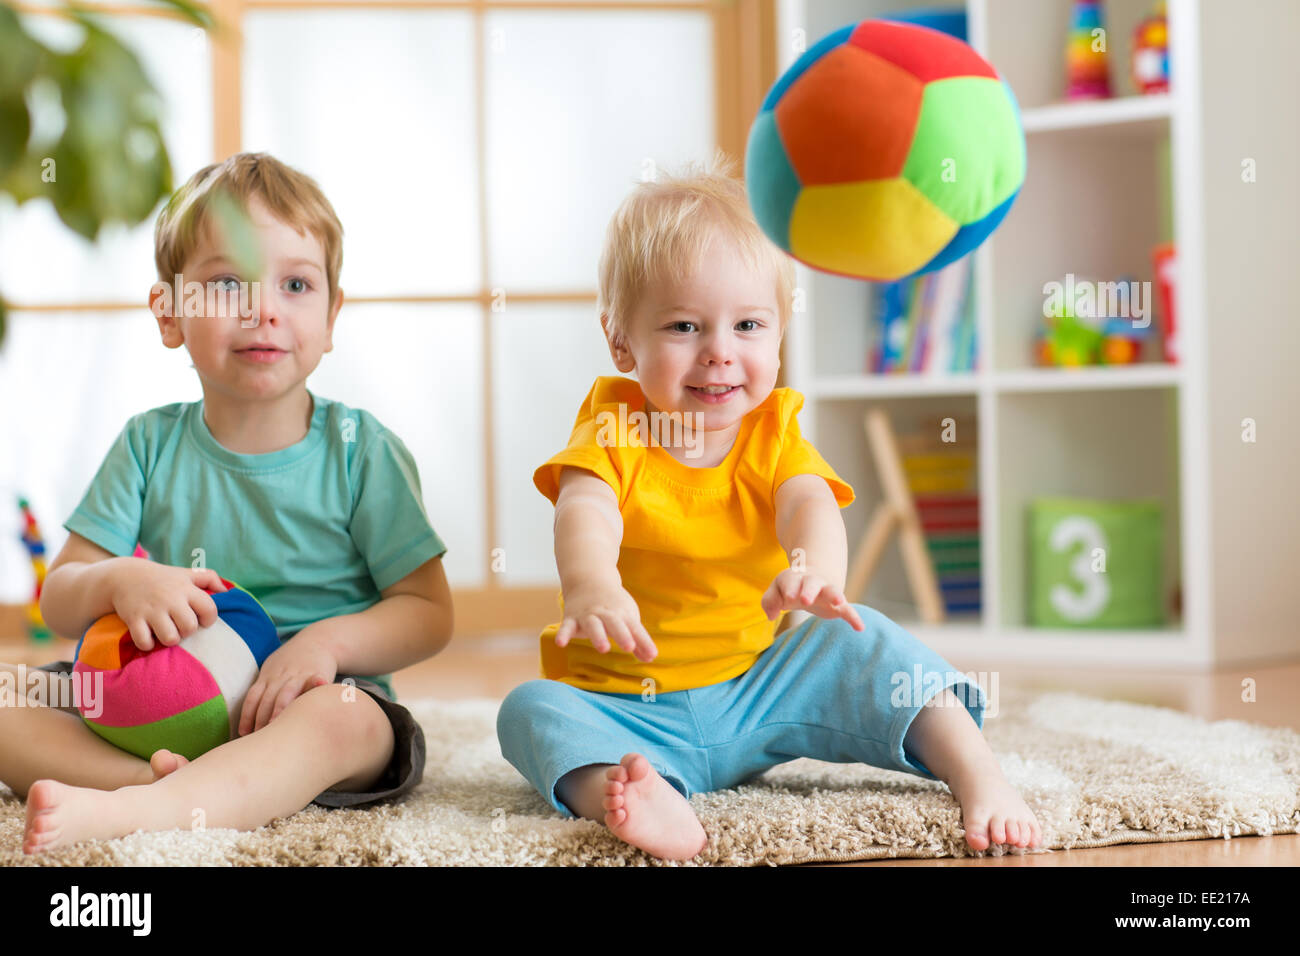 children playing with soft ball in playroom Stock Photo